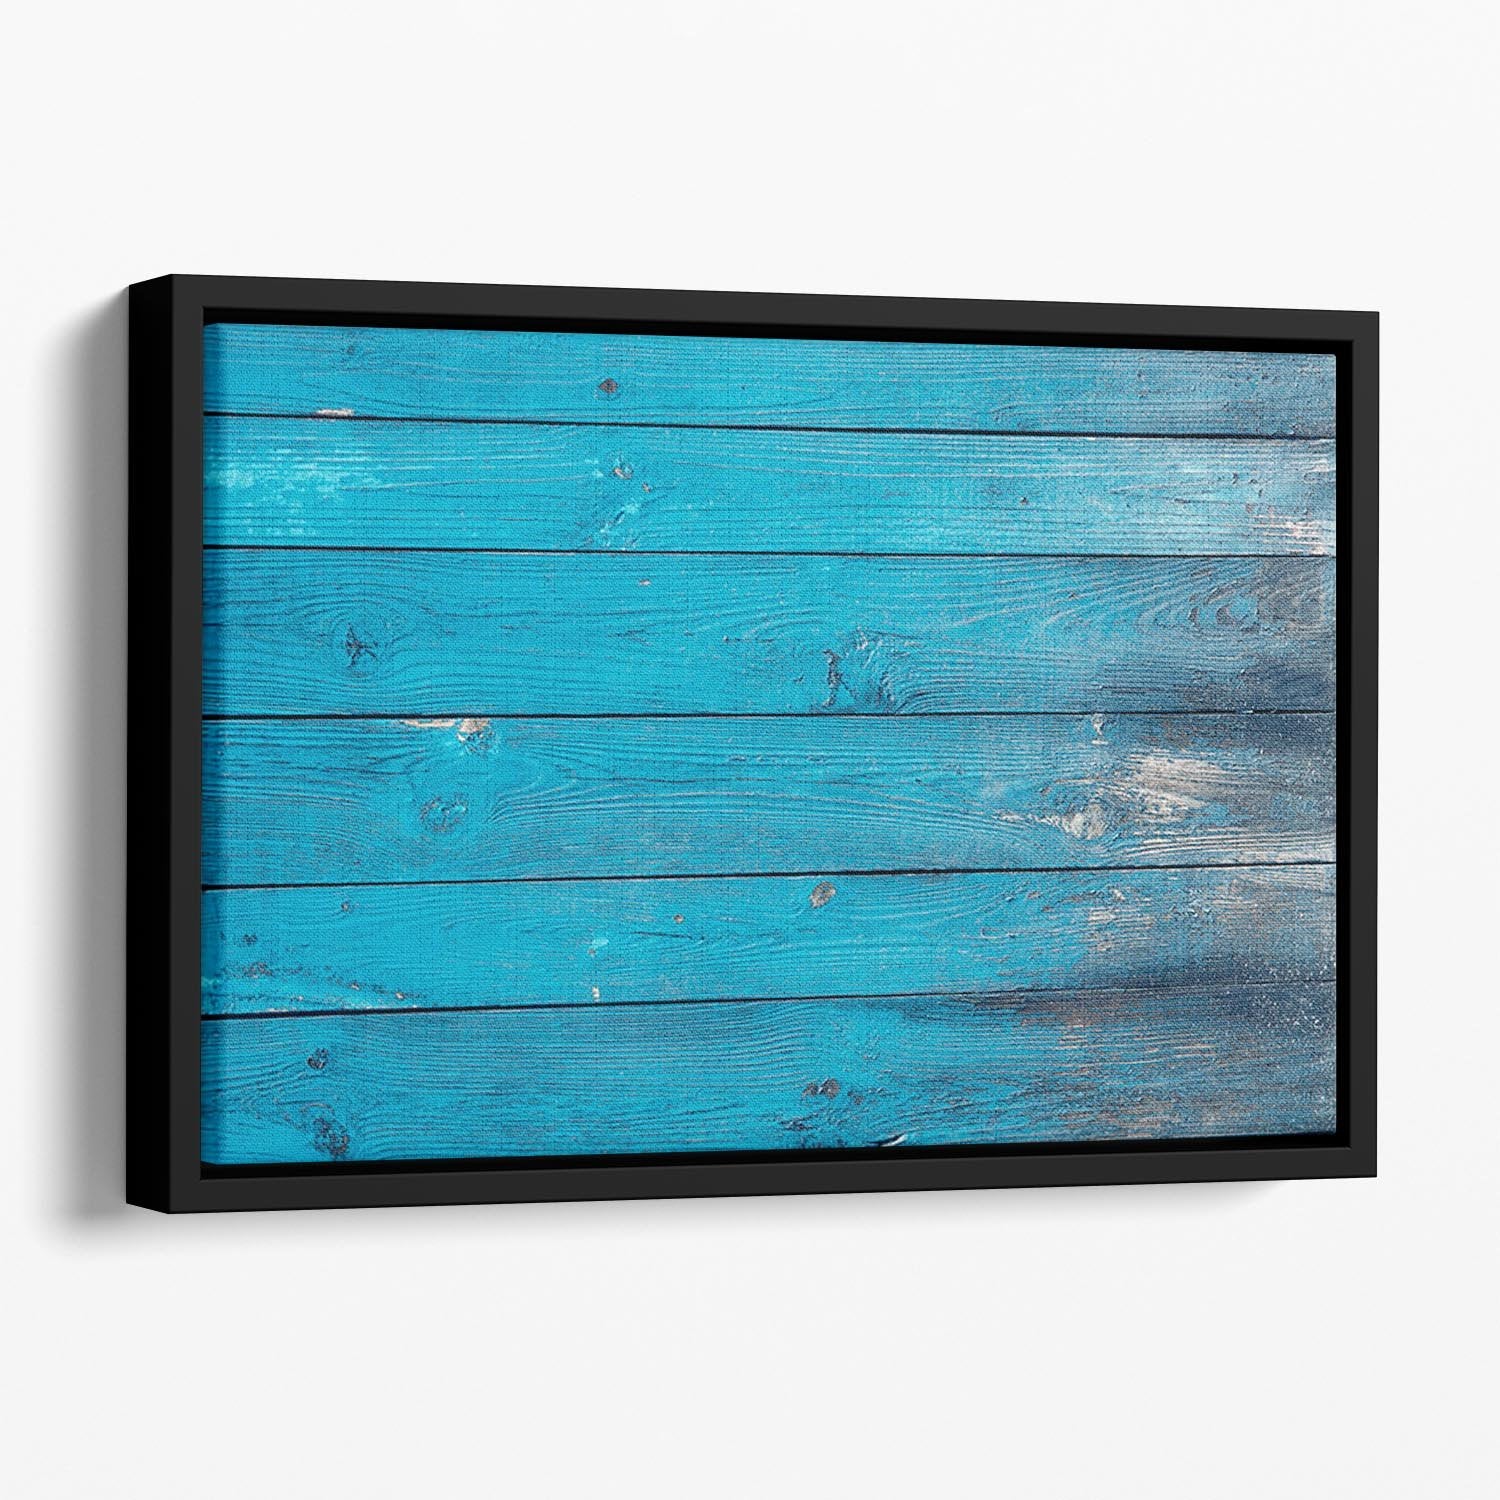 Blue painted wood texture Floating Framed Canvas - Canvas Art Rocks - 1